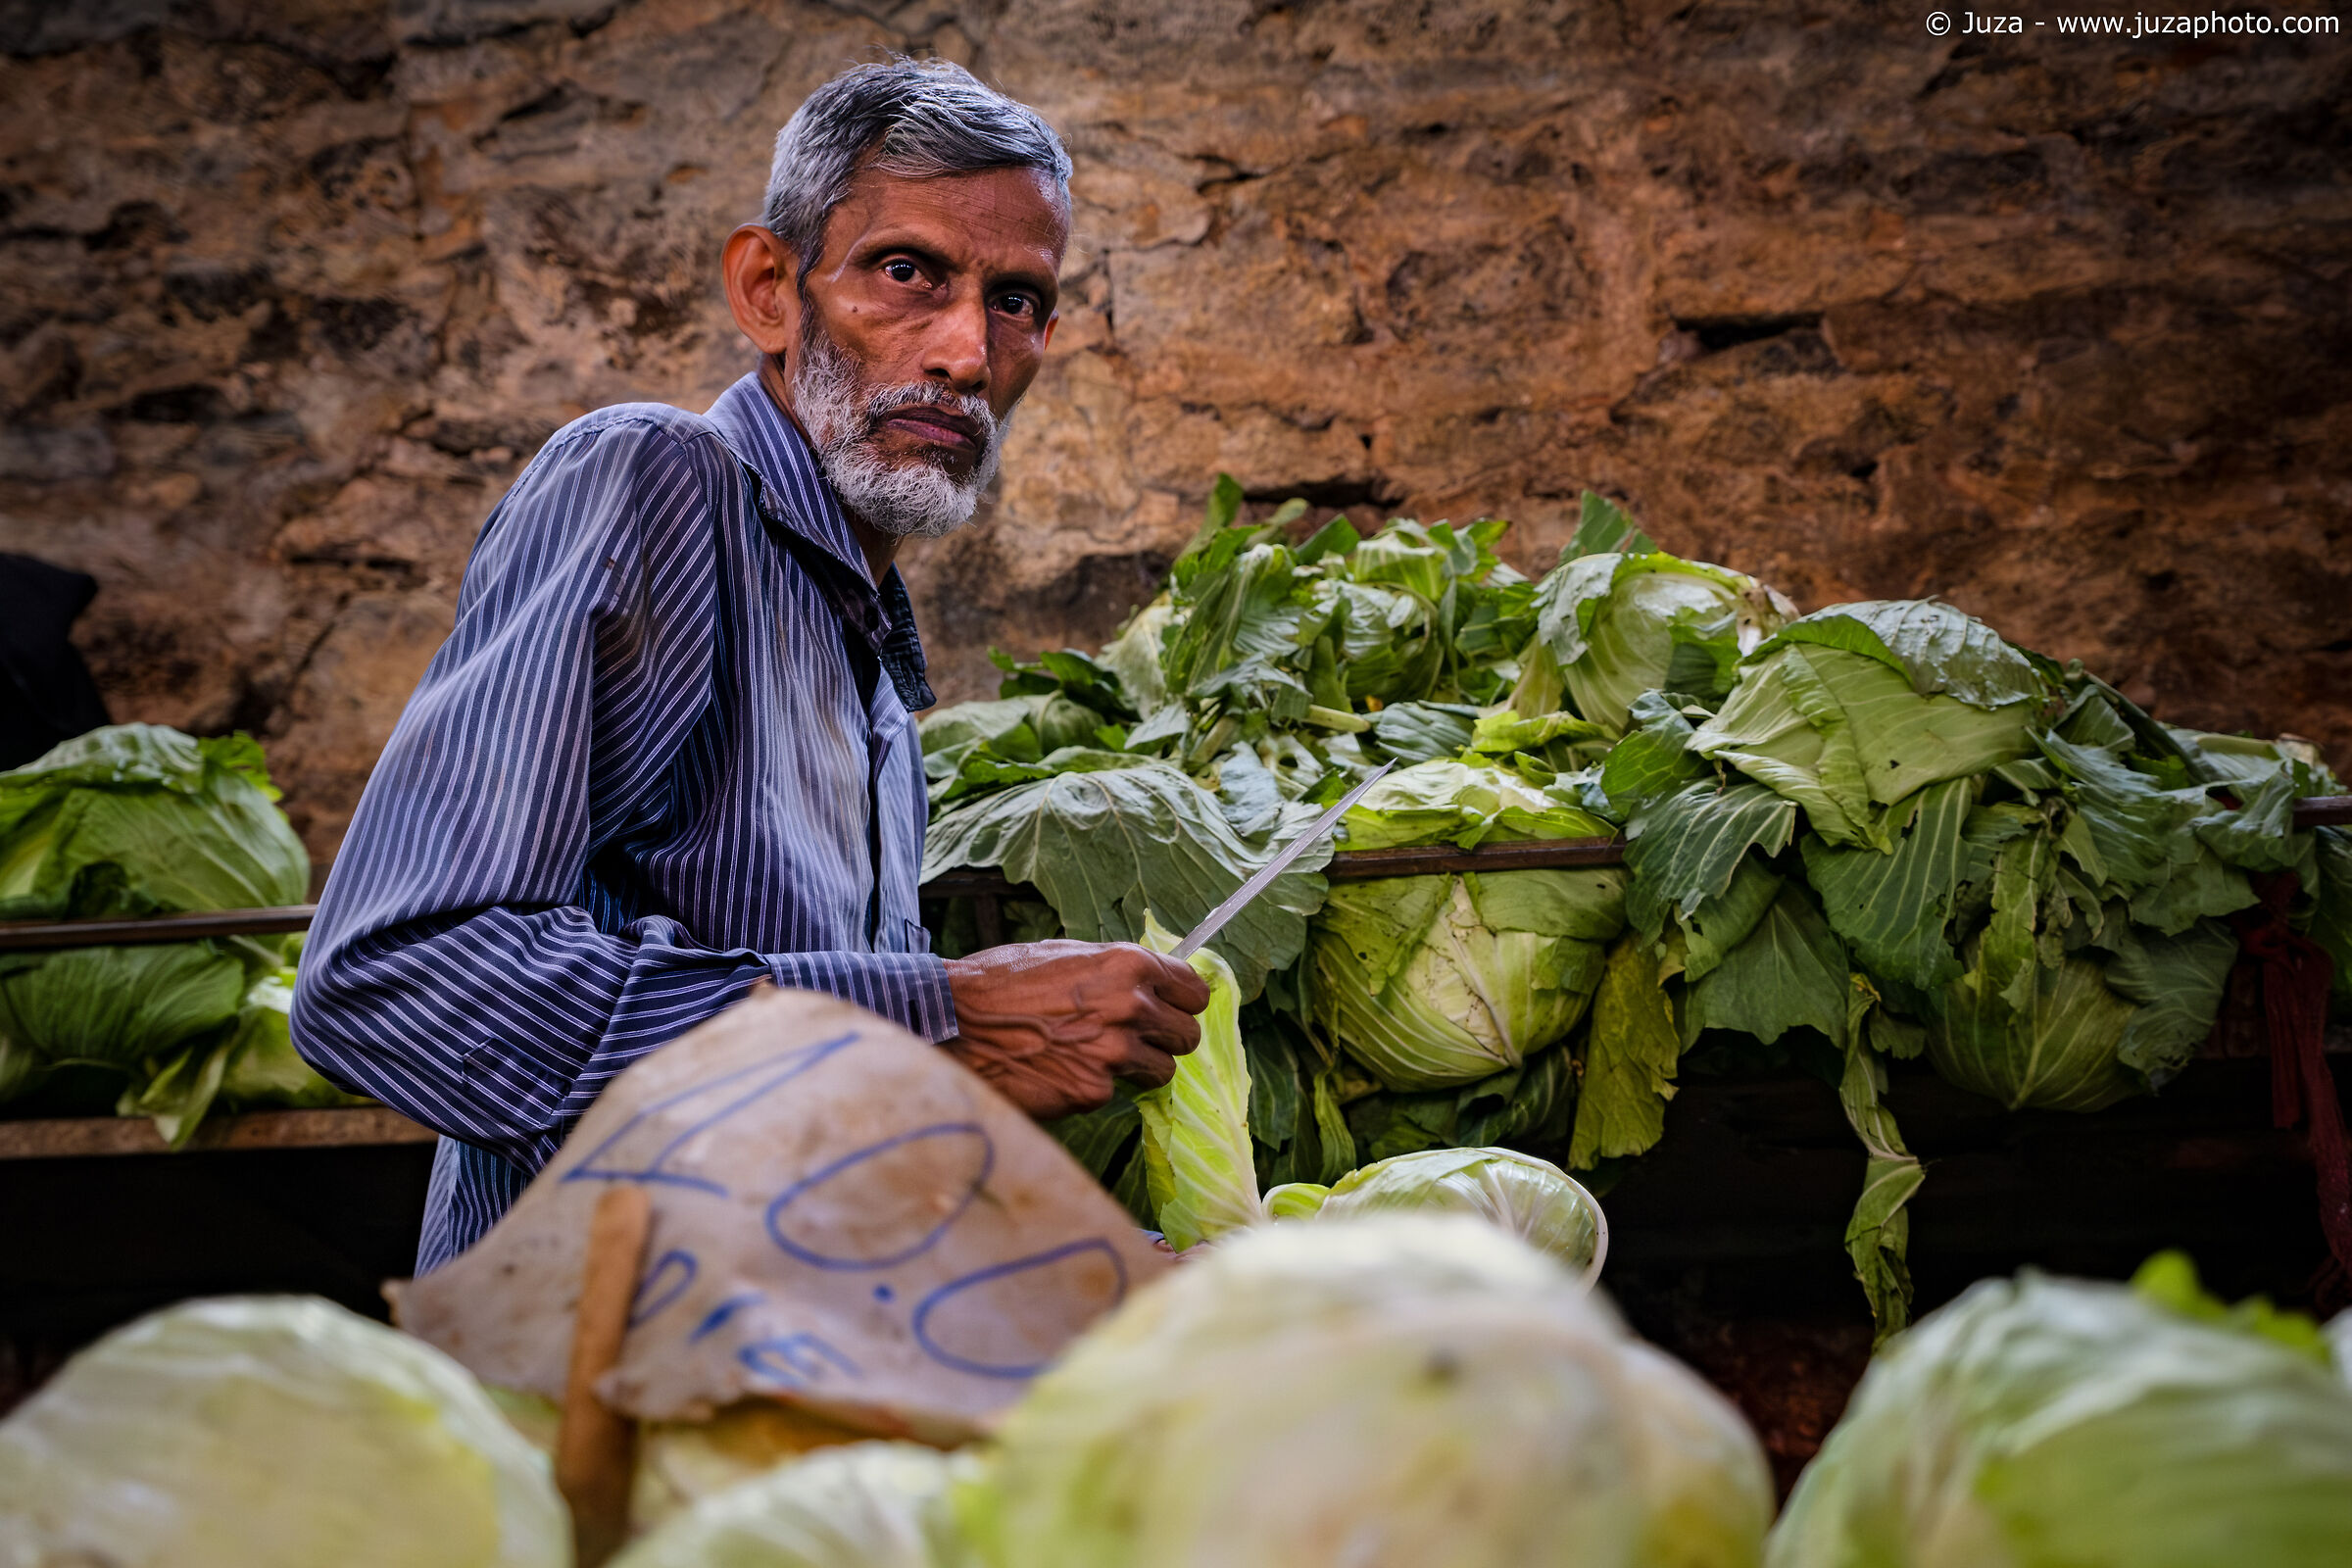 The seller of cabbage (Port Louis)...